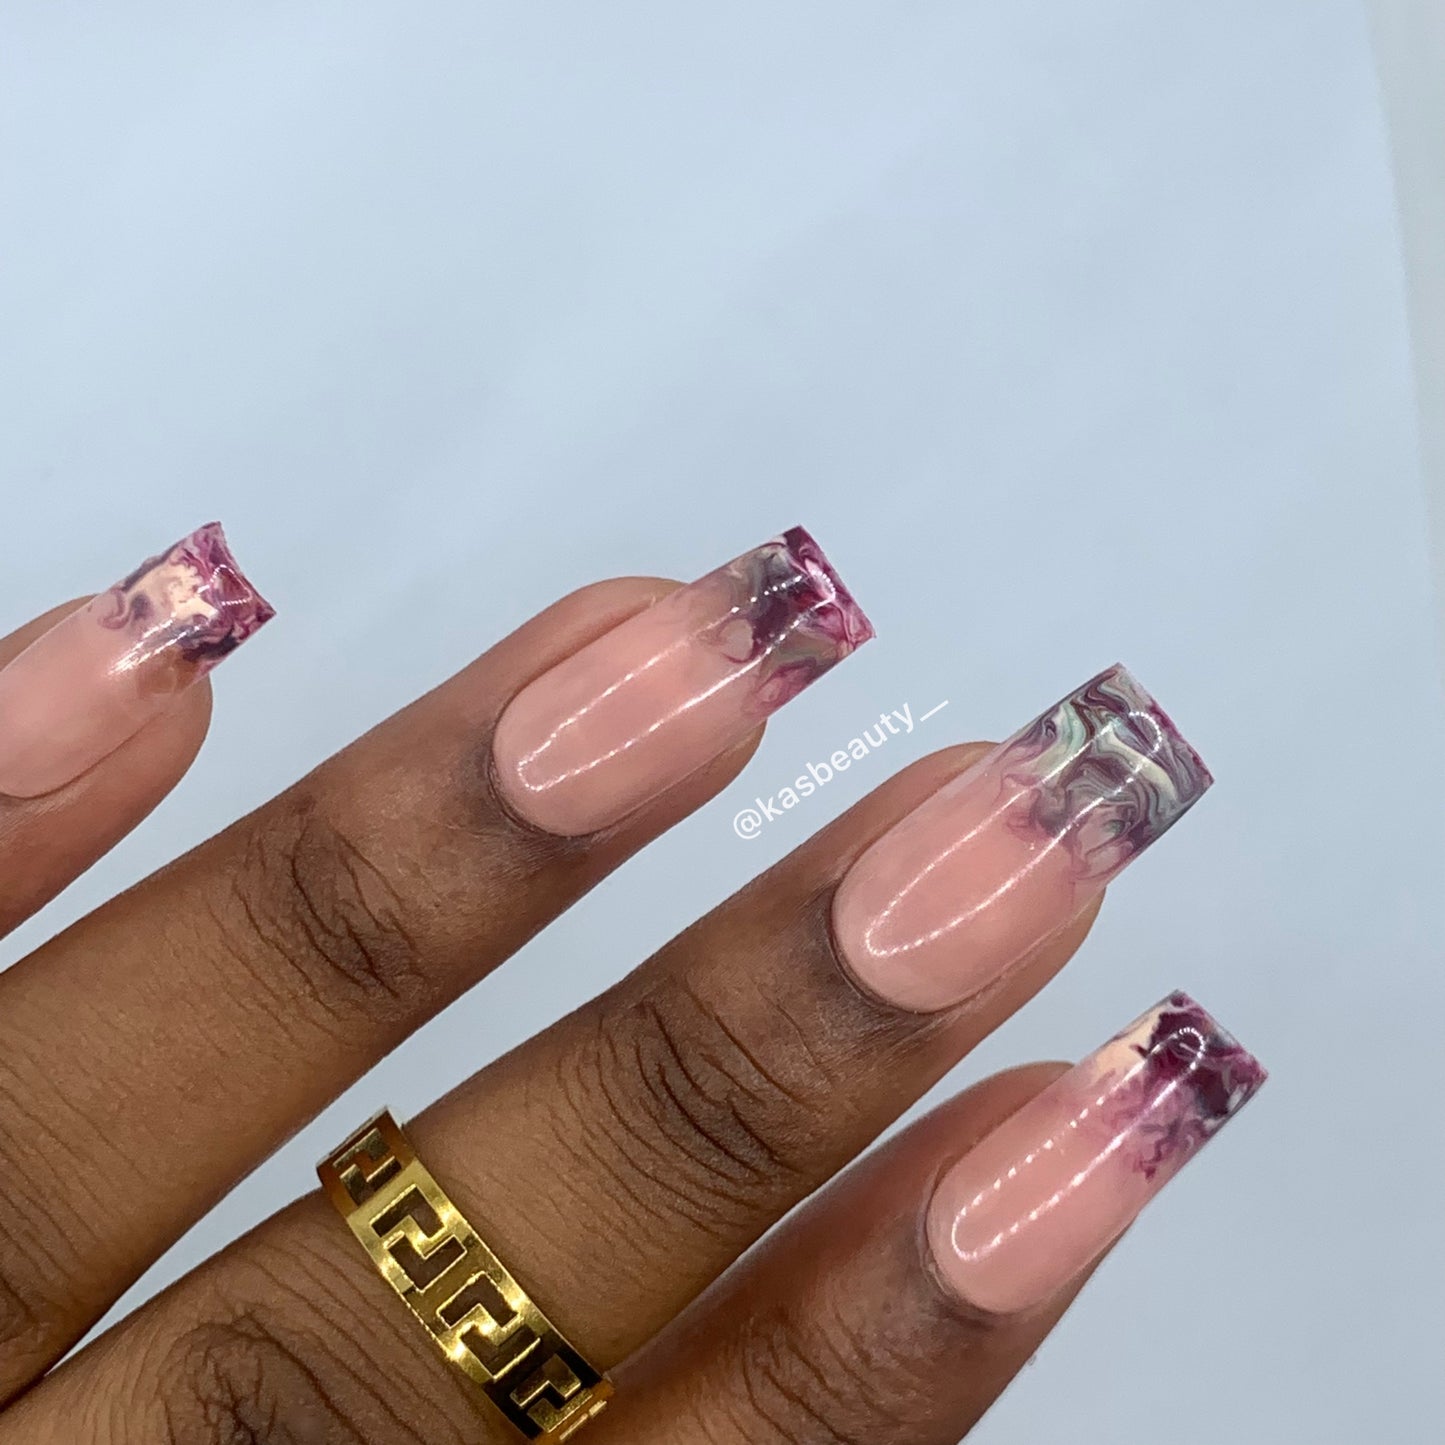 Evelyn Press On Nails